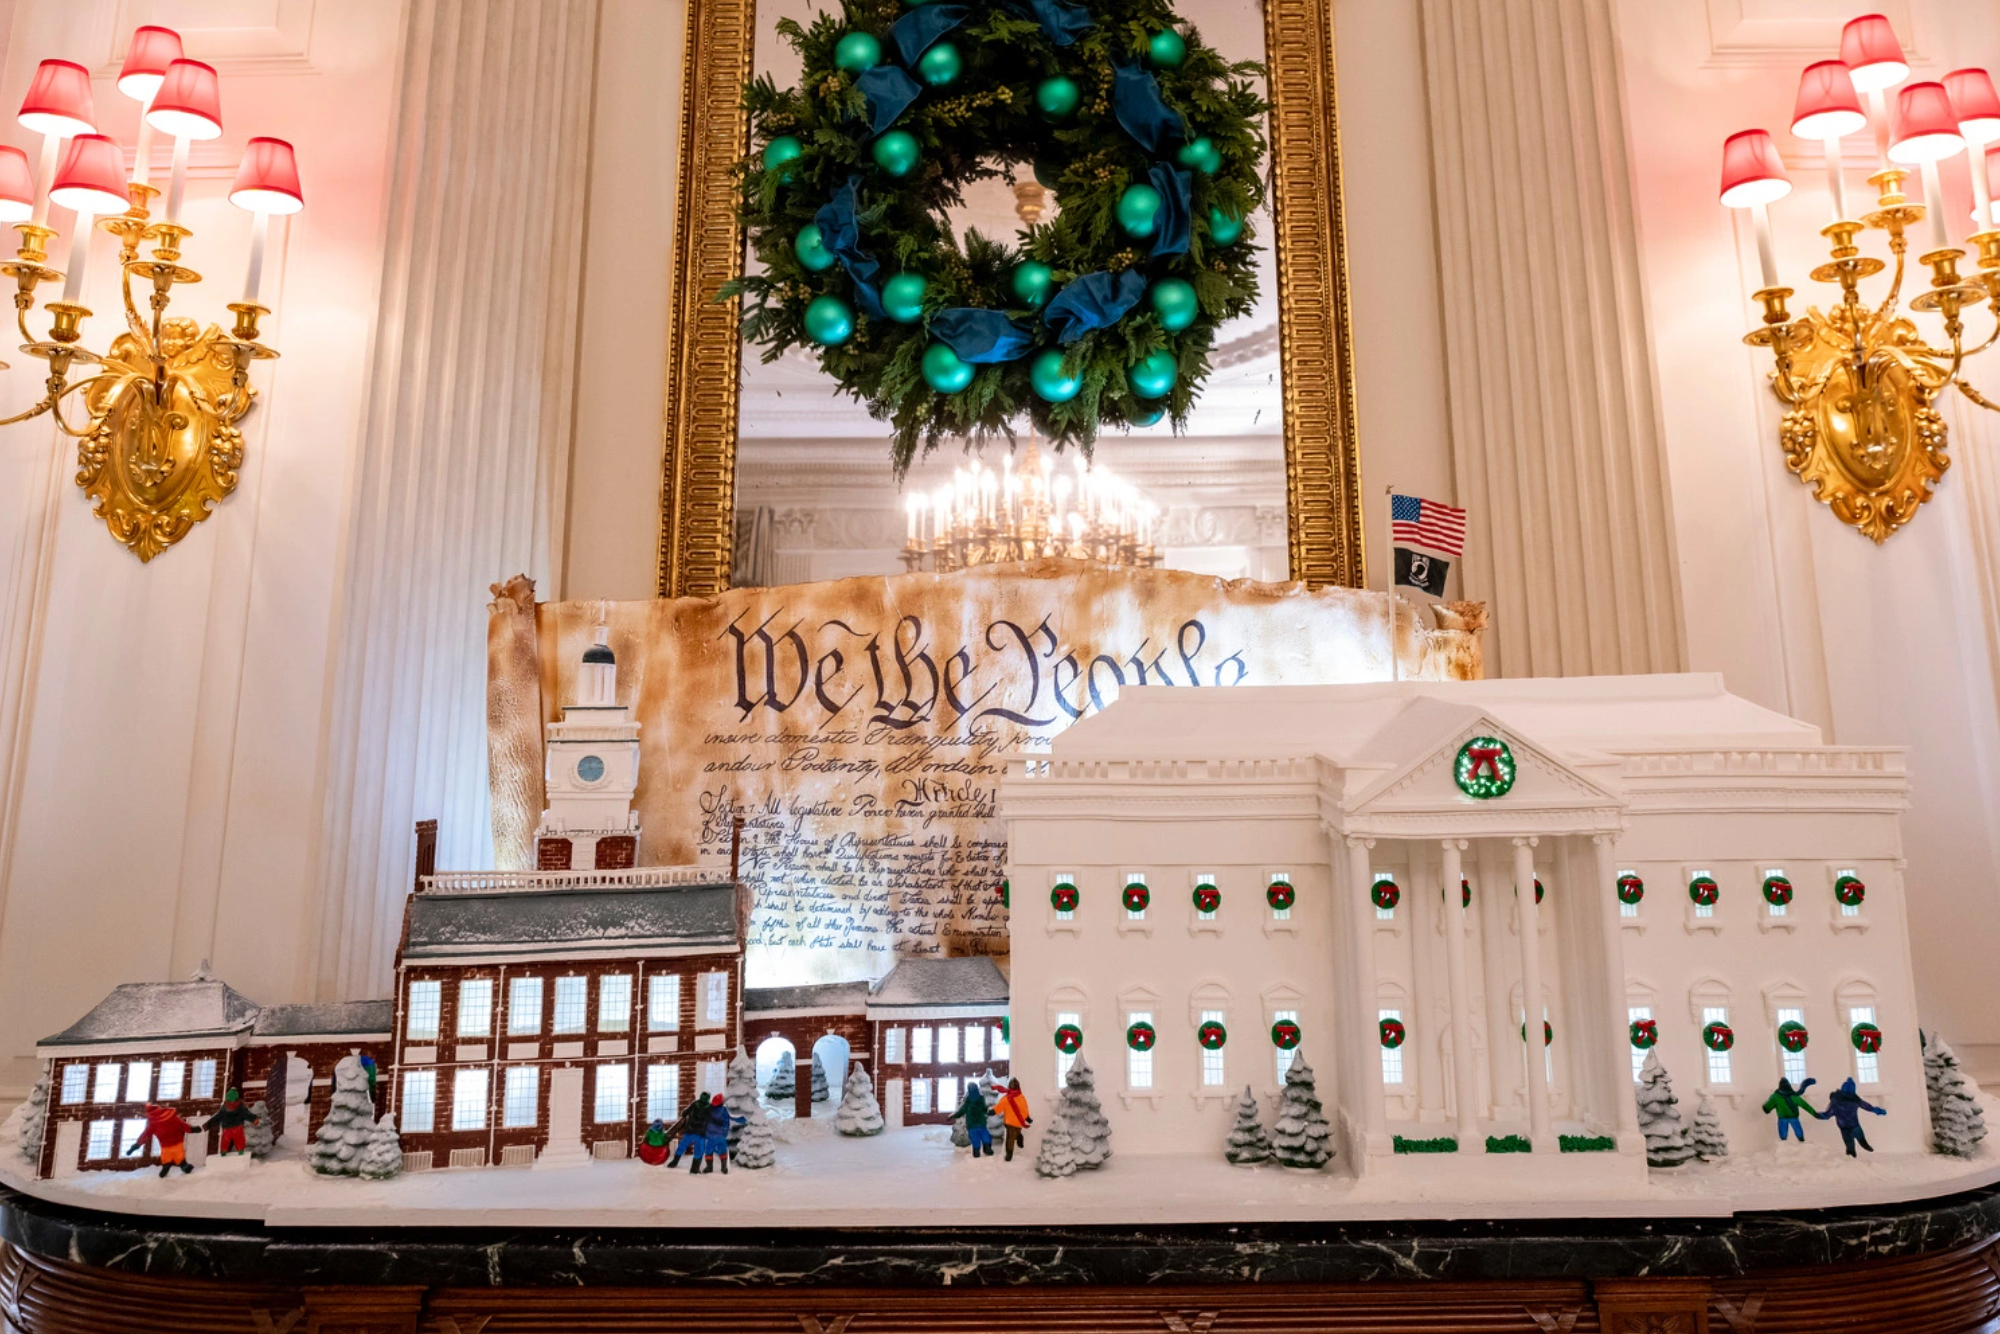 2022 Gingerbread White House and Independence Hall replicas.